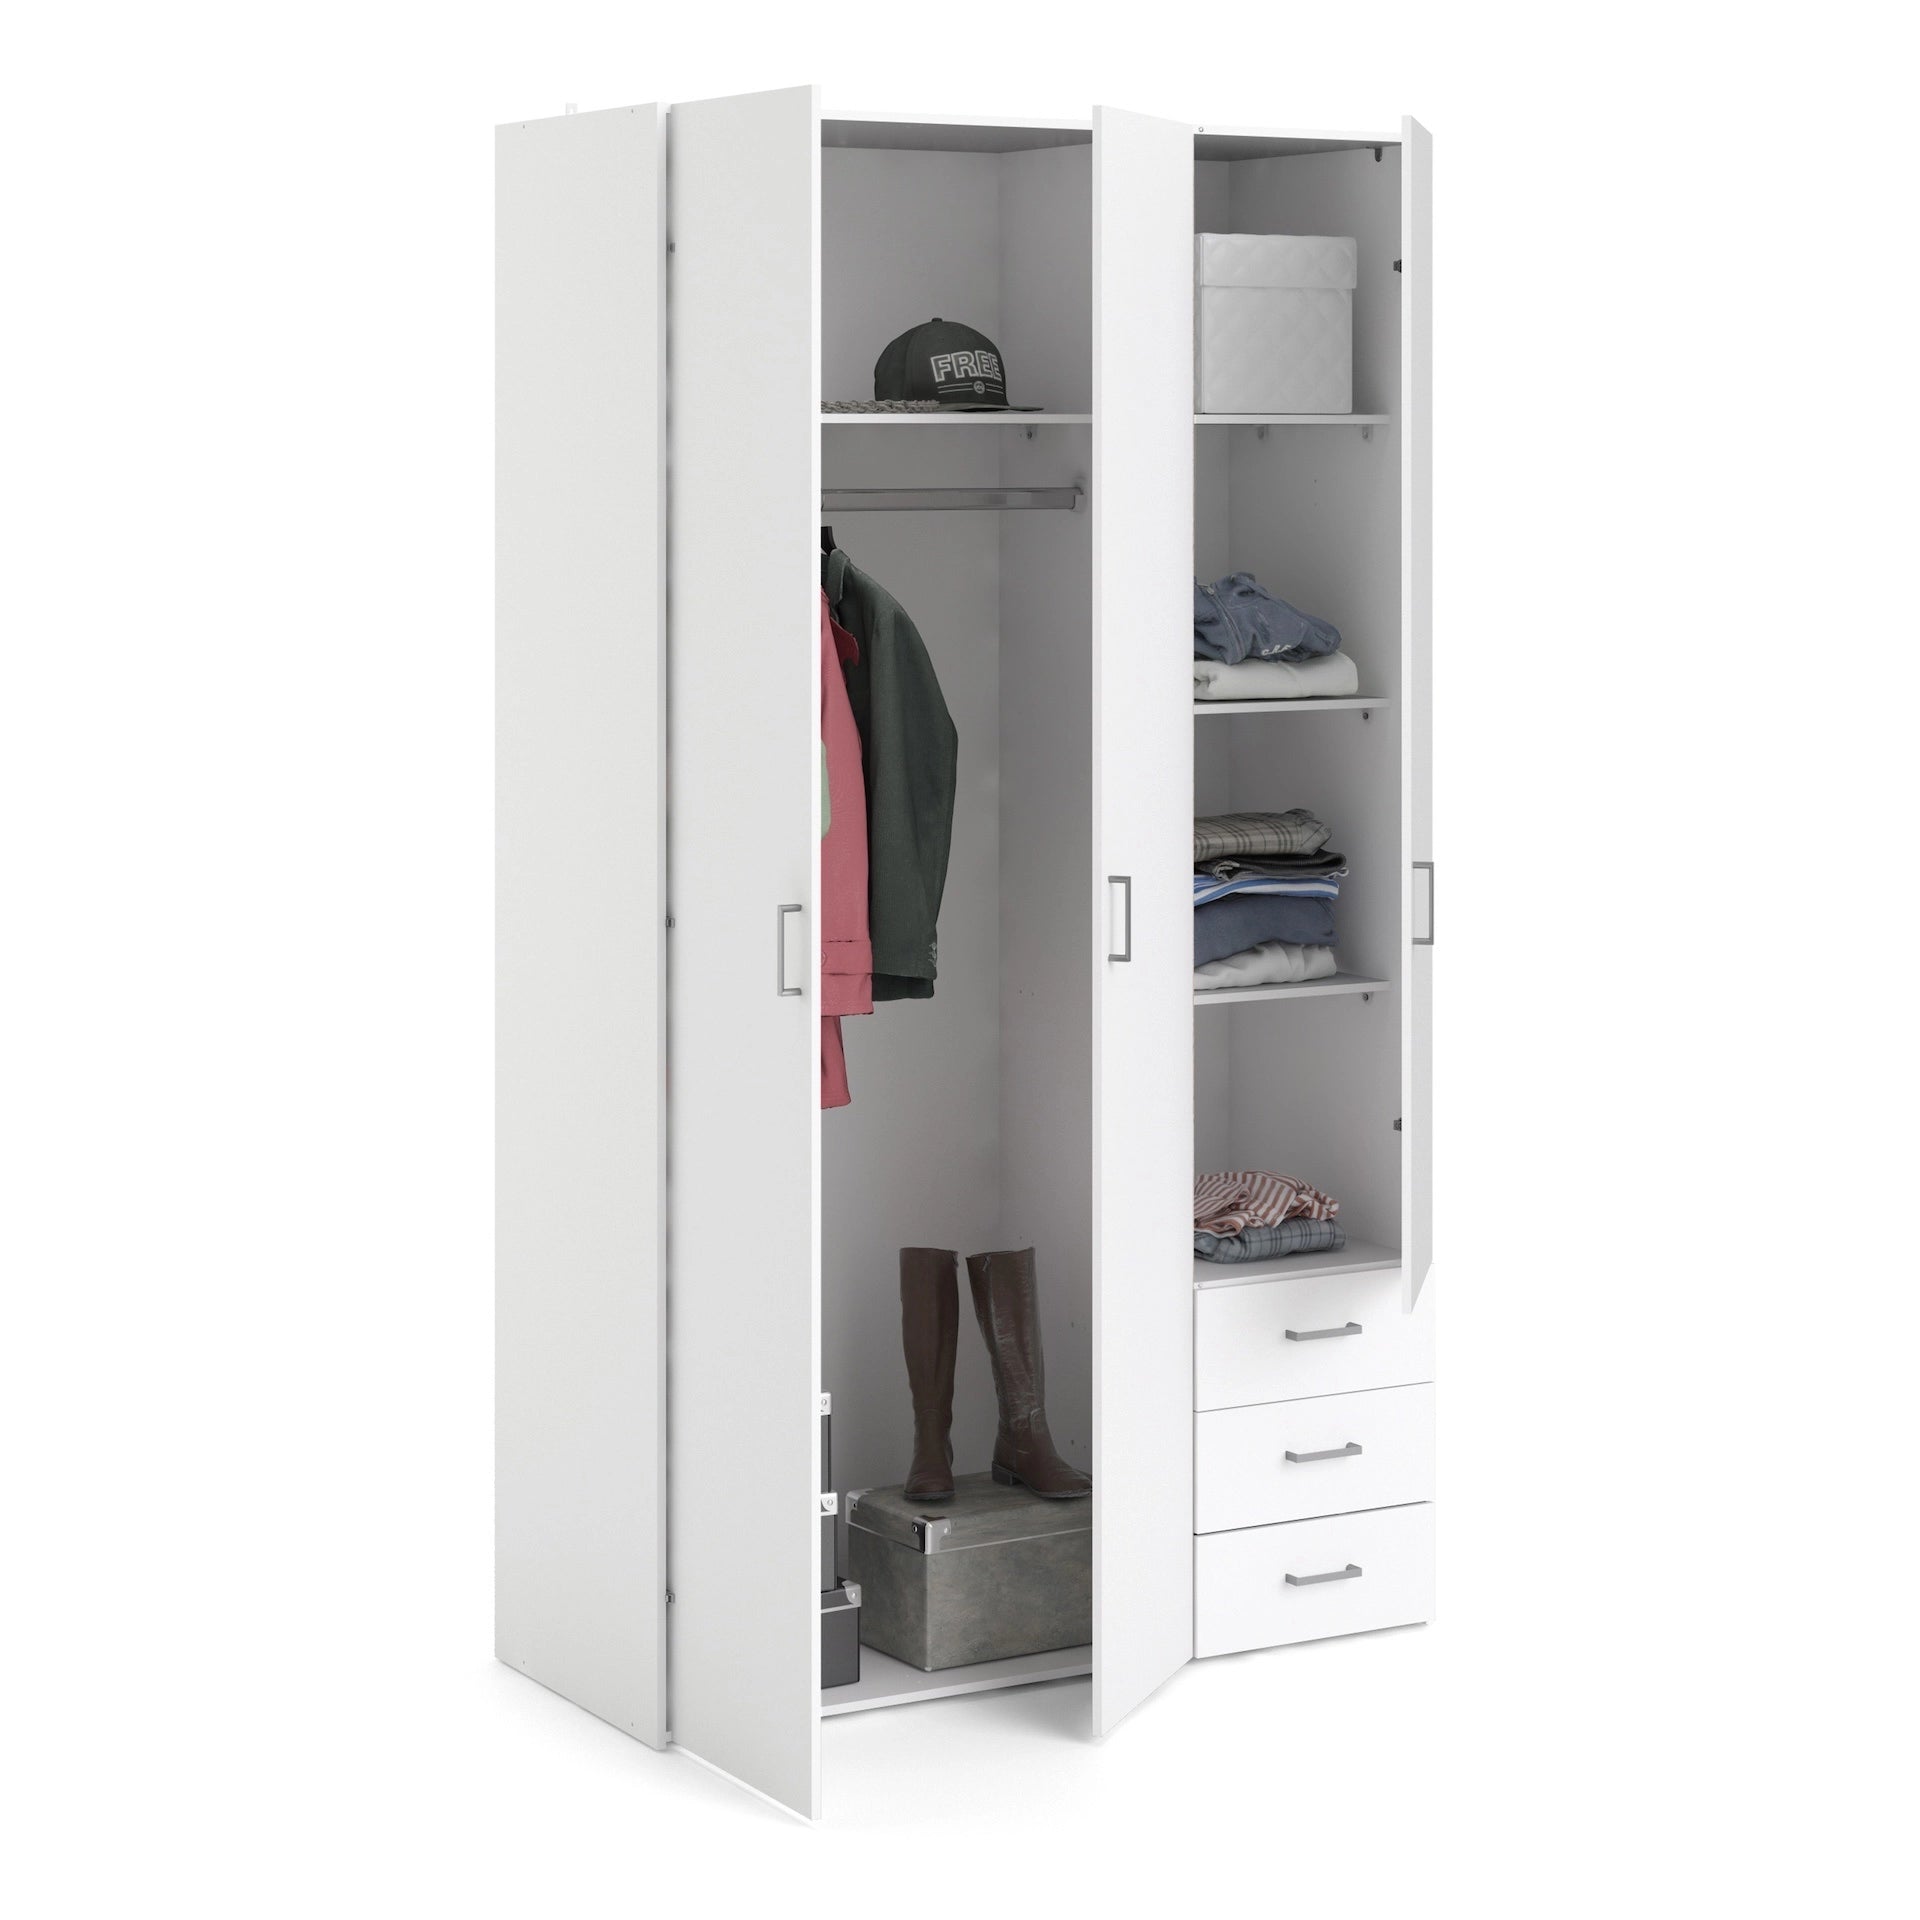 Furniture To Go Space Wardrobe - 3 Doors 3 Drawers in White 2000